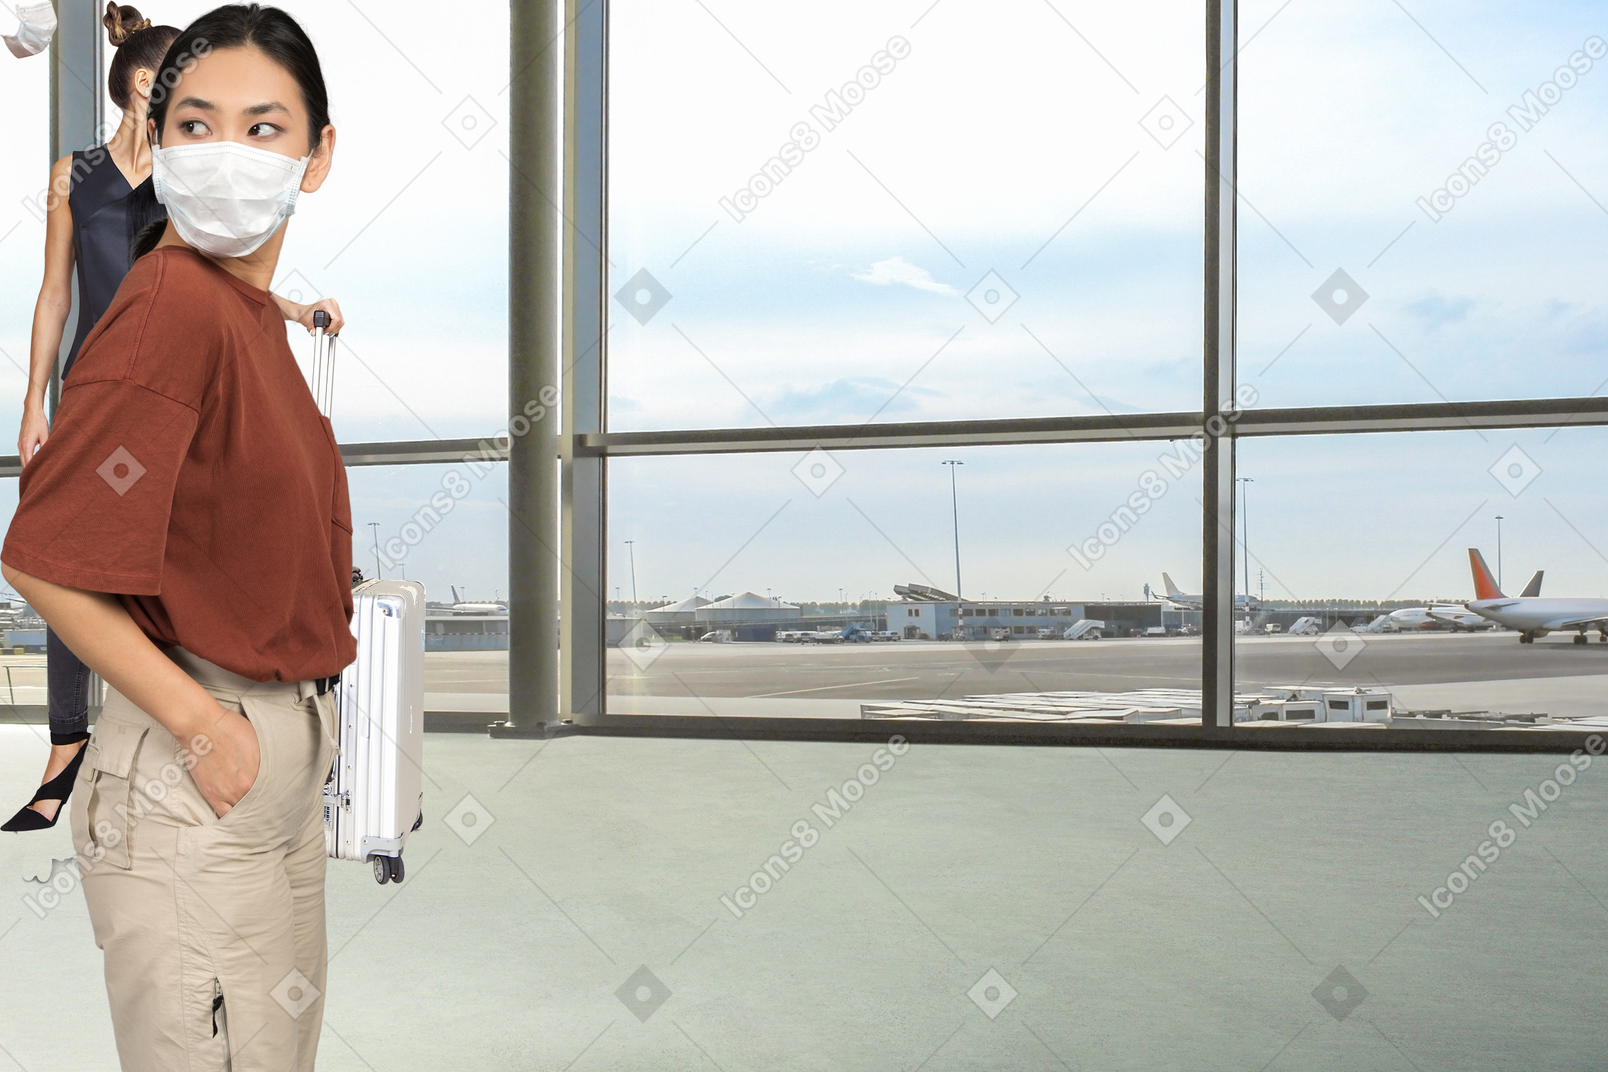 Two women standing in an airport